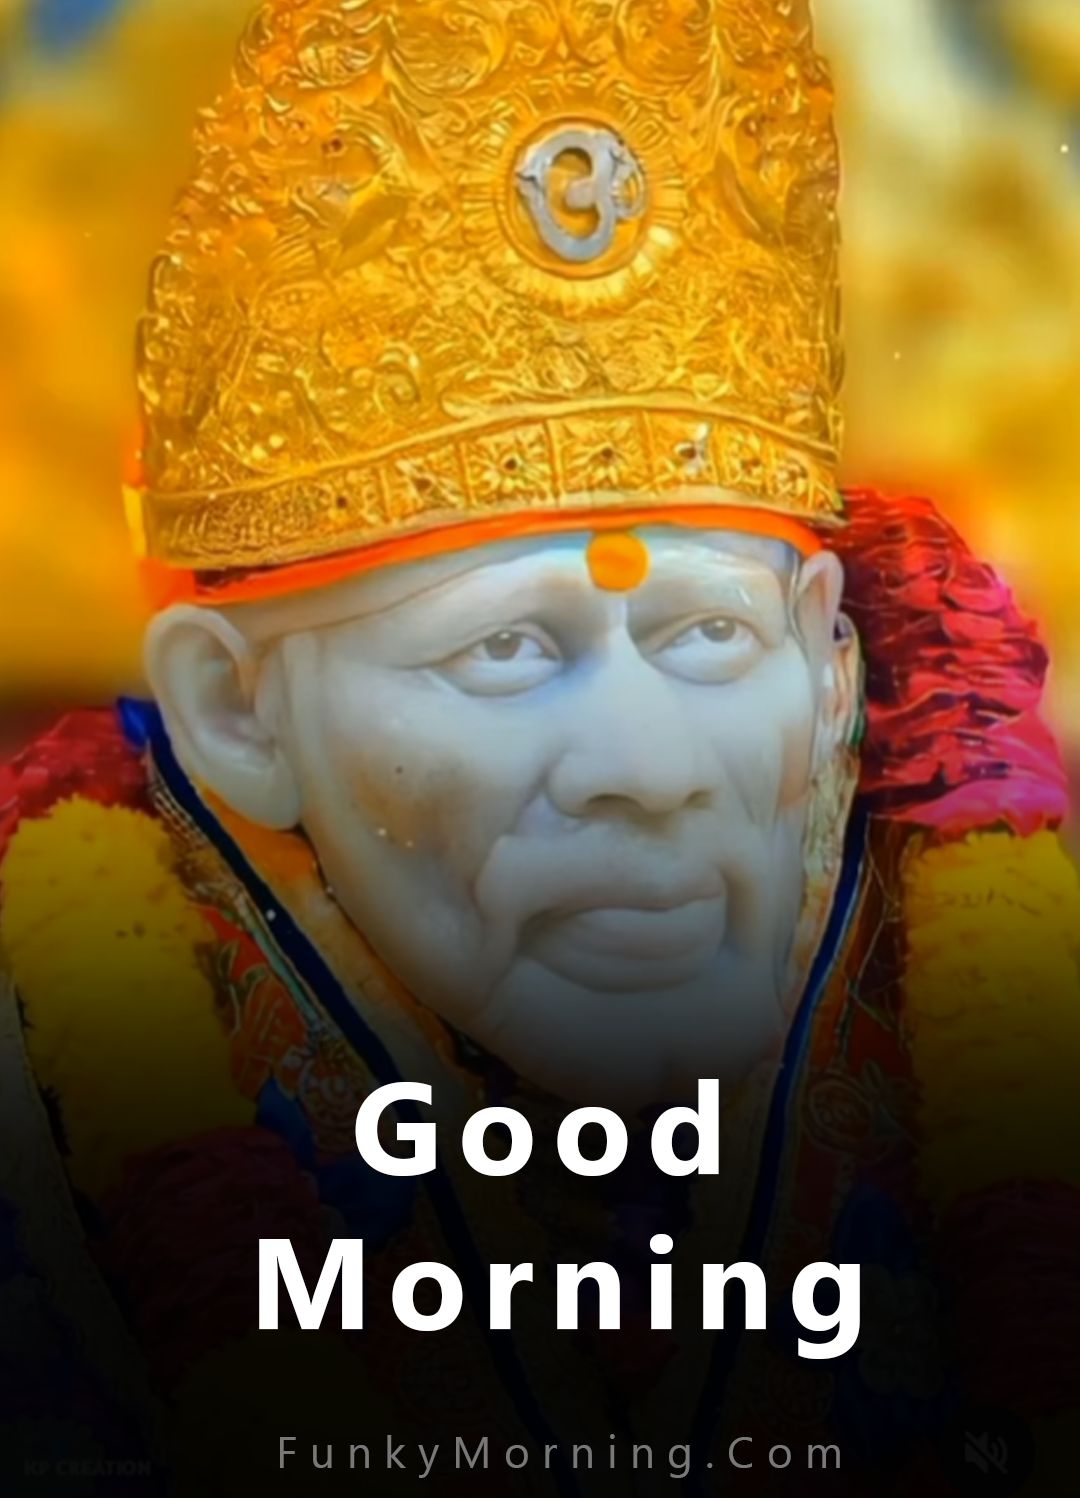 Top 999+ good morning images with sai baba – Amazing Collection good morning images with sai baba Full 4K